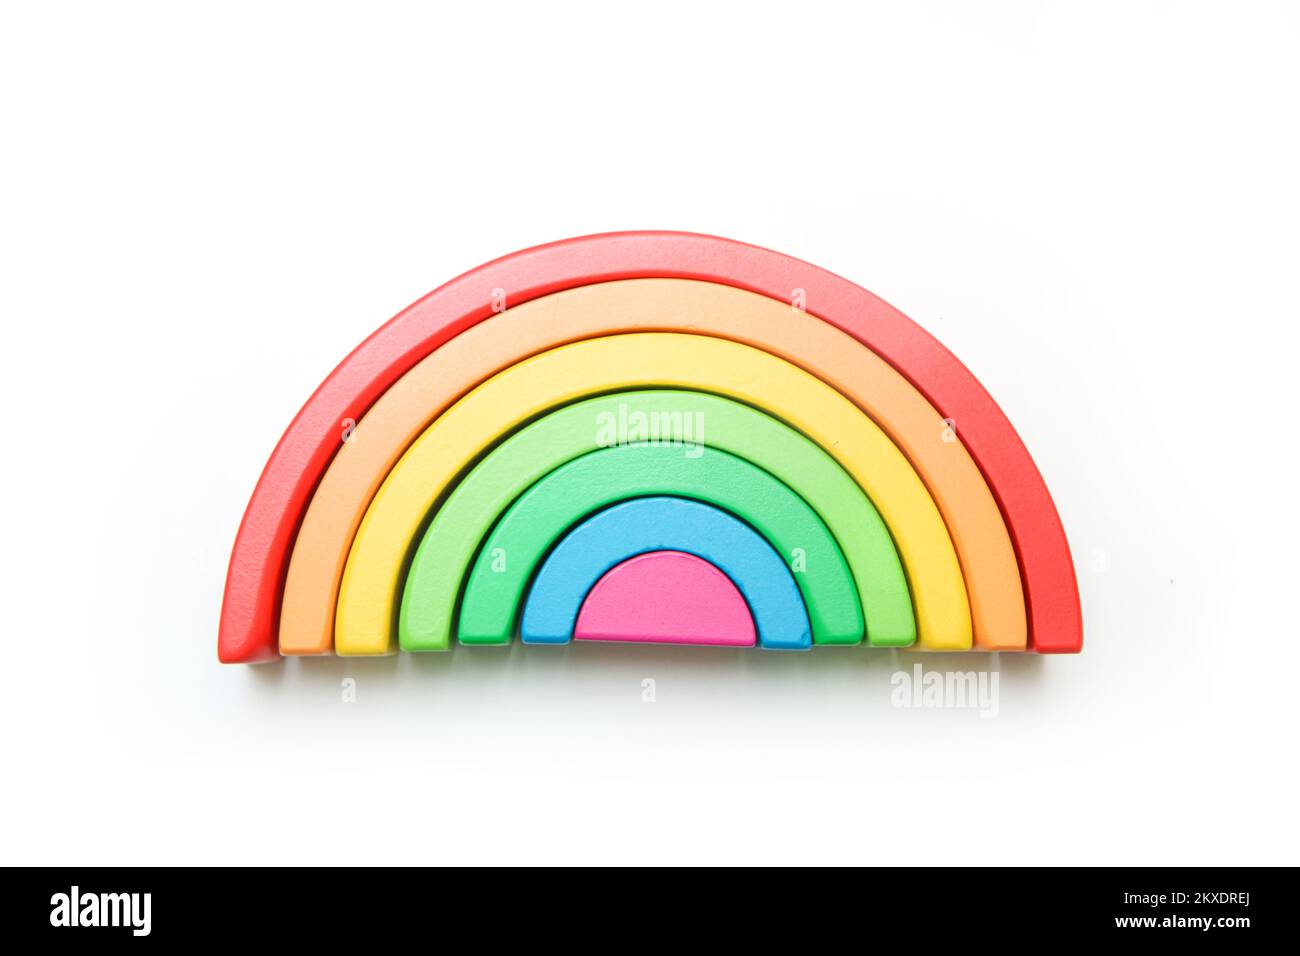 The wooden rainbow toy for children isolated in a white background. Stock Photo